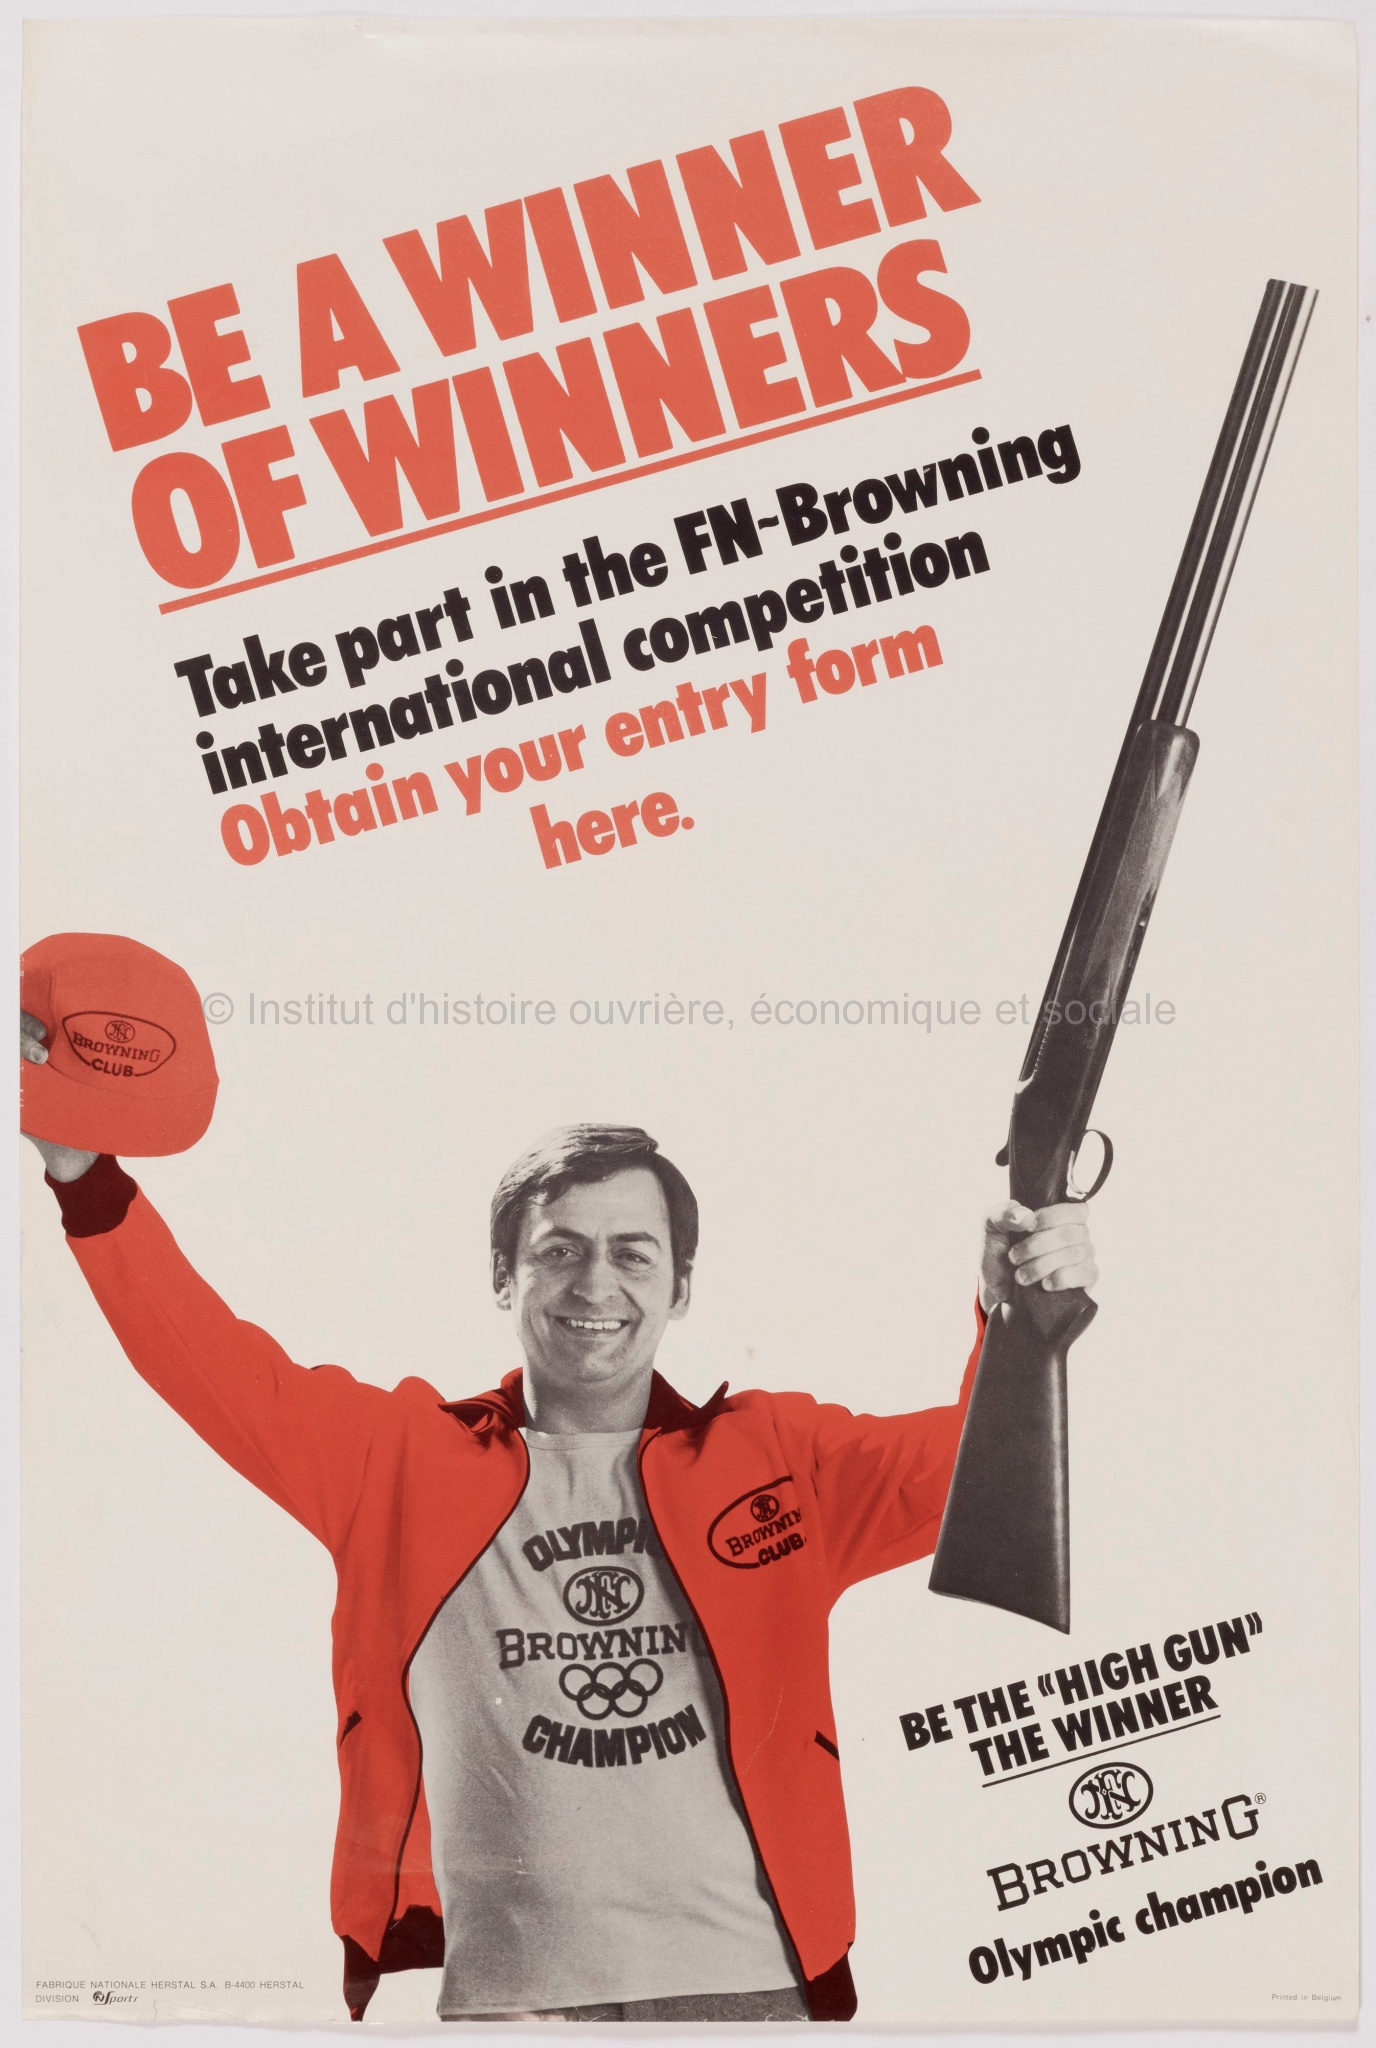 Be a winner of winners : take part in the FN-Browning international competition